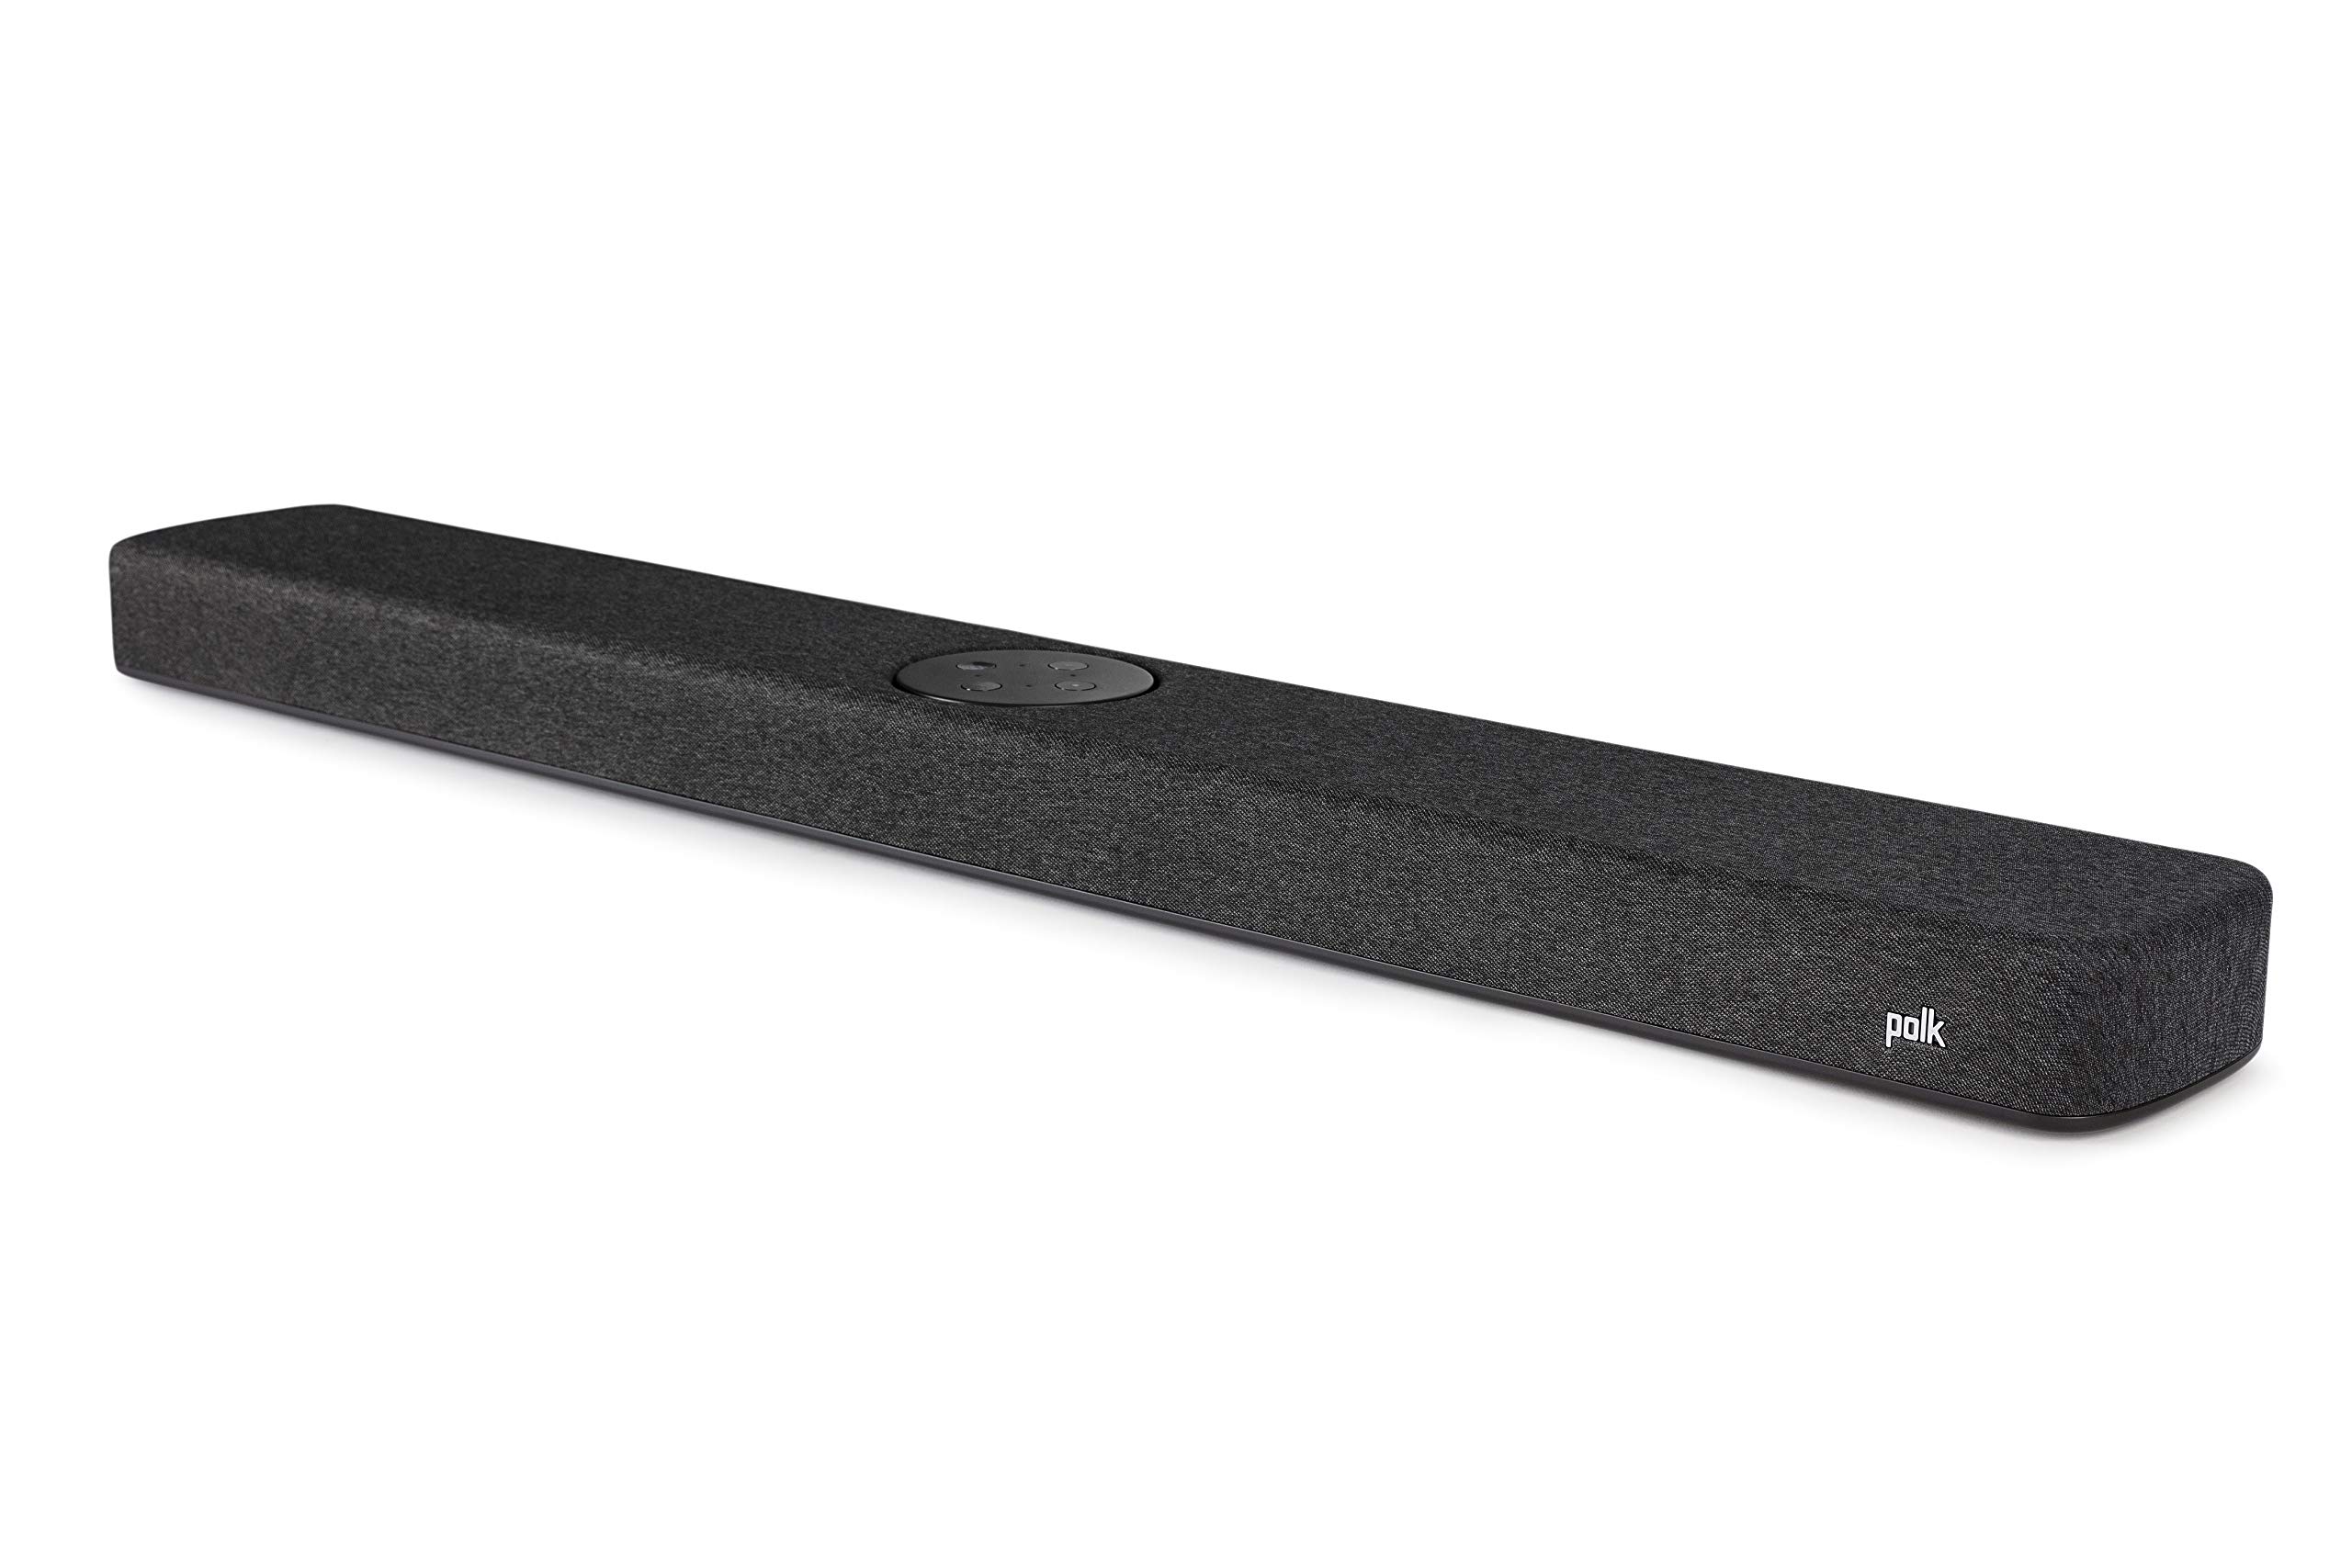 How To Connect Polk Soundbar To Subwoofer